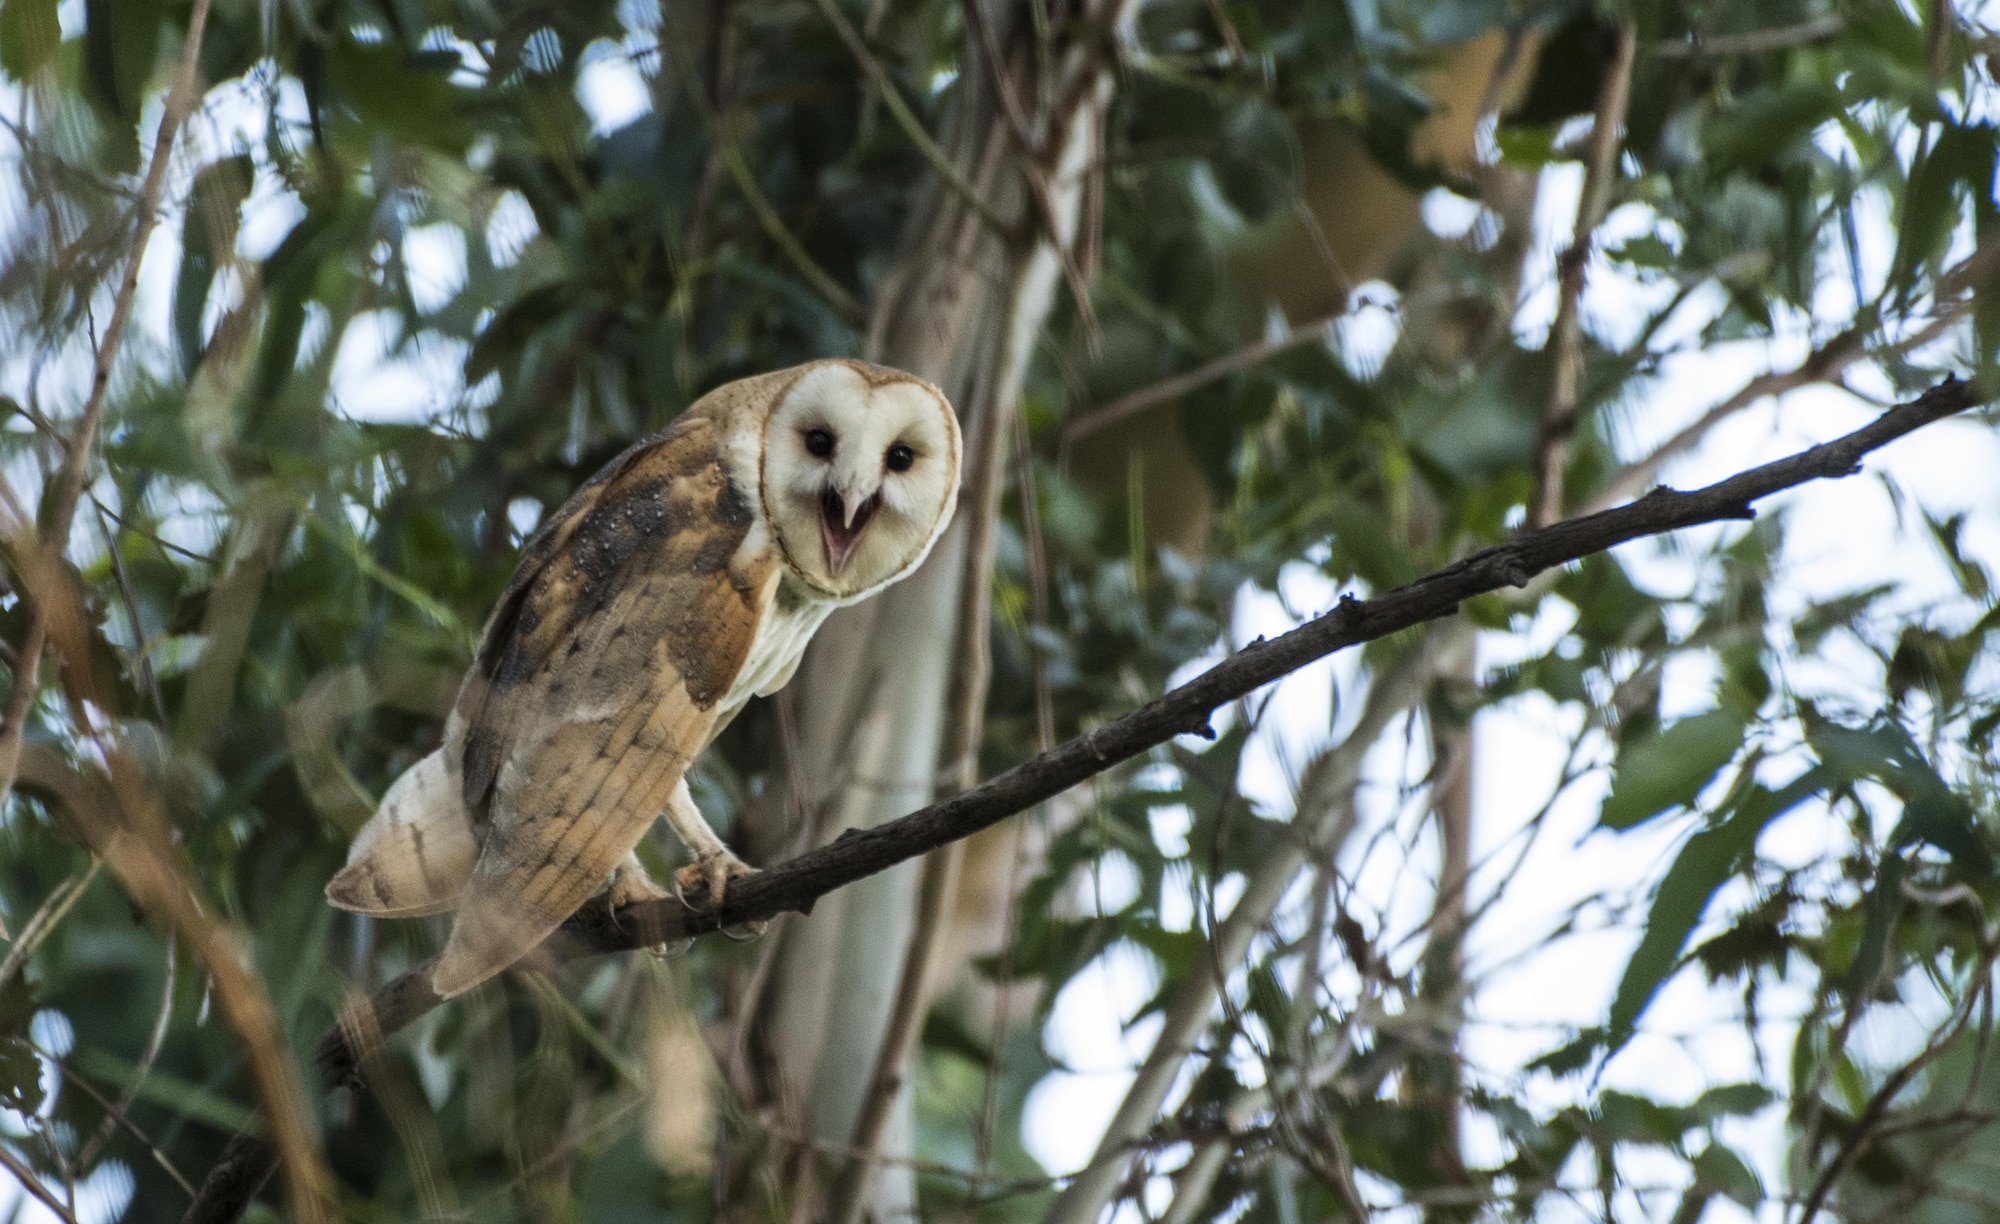 A barn owl roosts in a eucalyptus tree, Apr. 21, 2017, Travis Air Force Base, Calif. These owls make eerie, raspy calls, quite unlike the hoots of other owls. Despite a worldwide distribution, barn owls are declining in parts of their range due to habitat loss. Barn owls hunt by flying low, back and forth over open habitats, searching for small rodents primarily by sound. Barn owls are wonderful natural pest control, vintners have been using barn owls for rodent control for decades, by installing owl boxes amongst the grapevines.(U.S. Air Force photo/ Heide Couch)